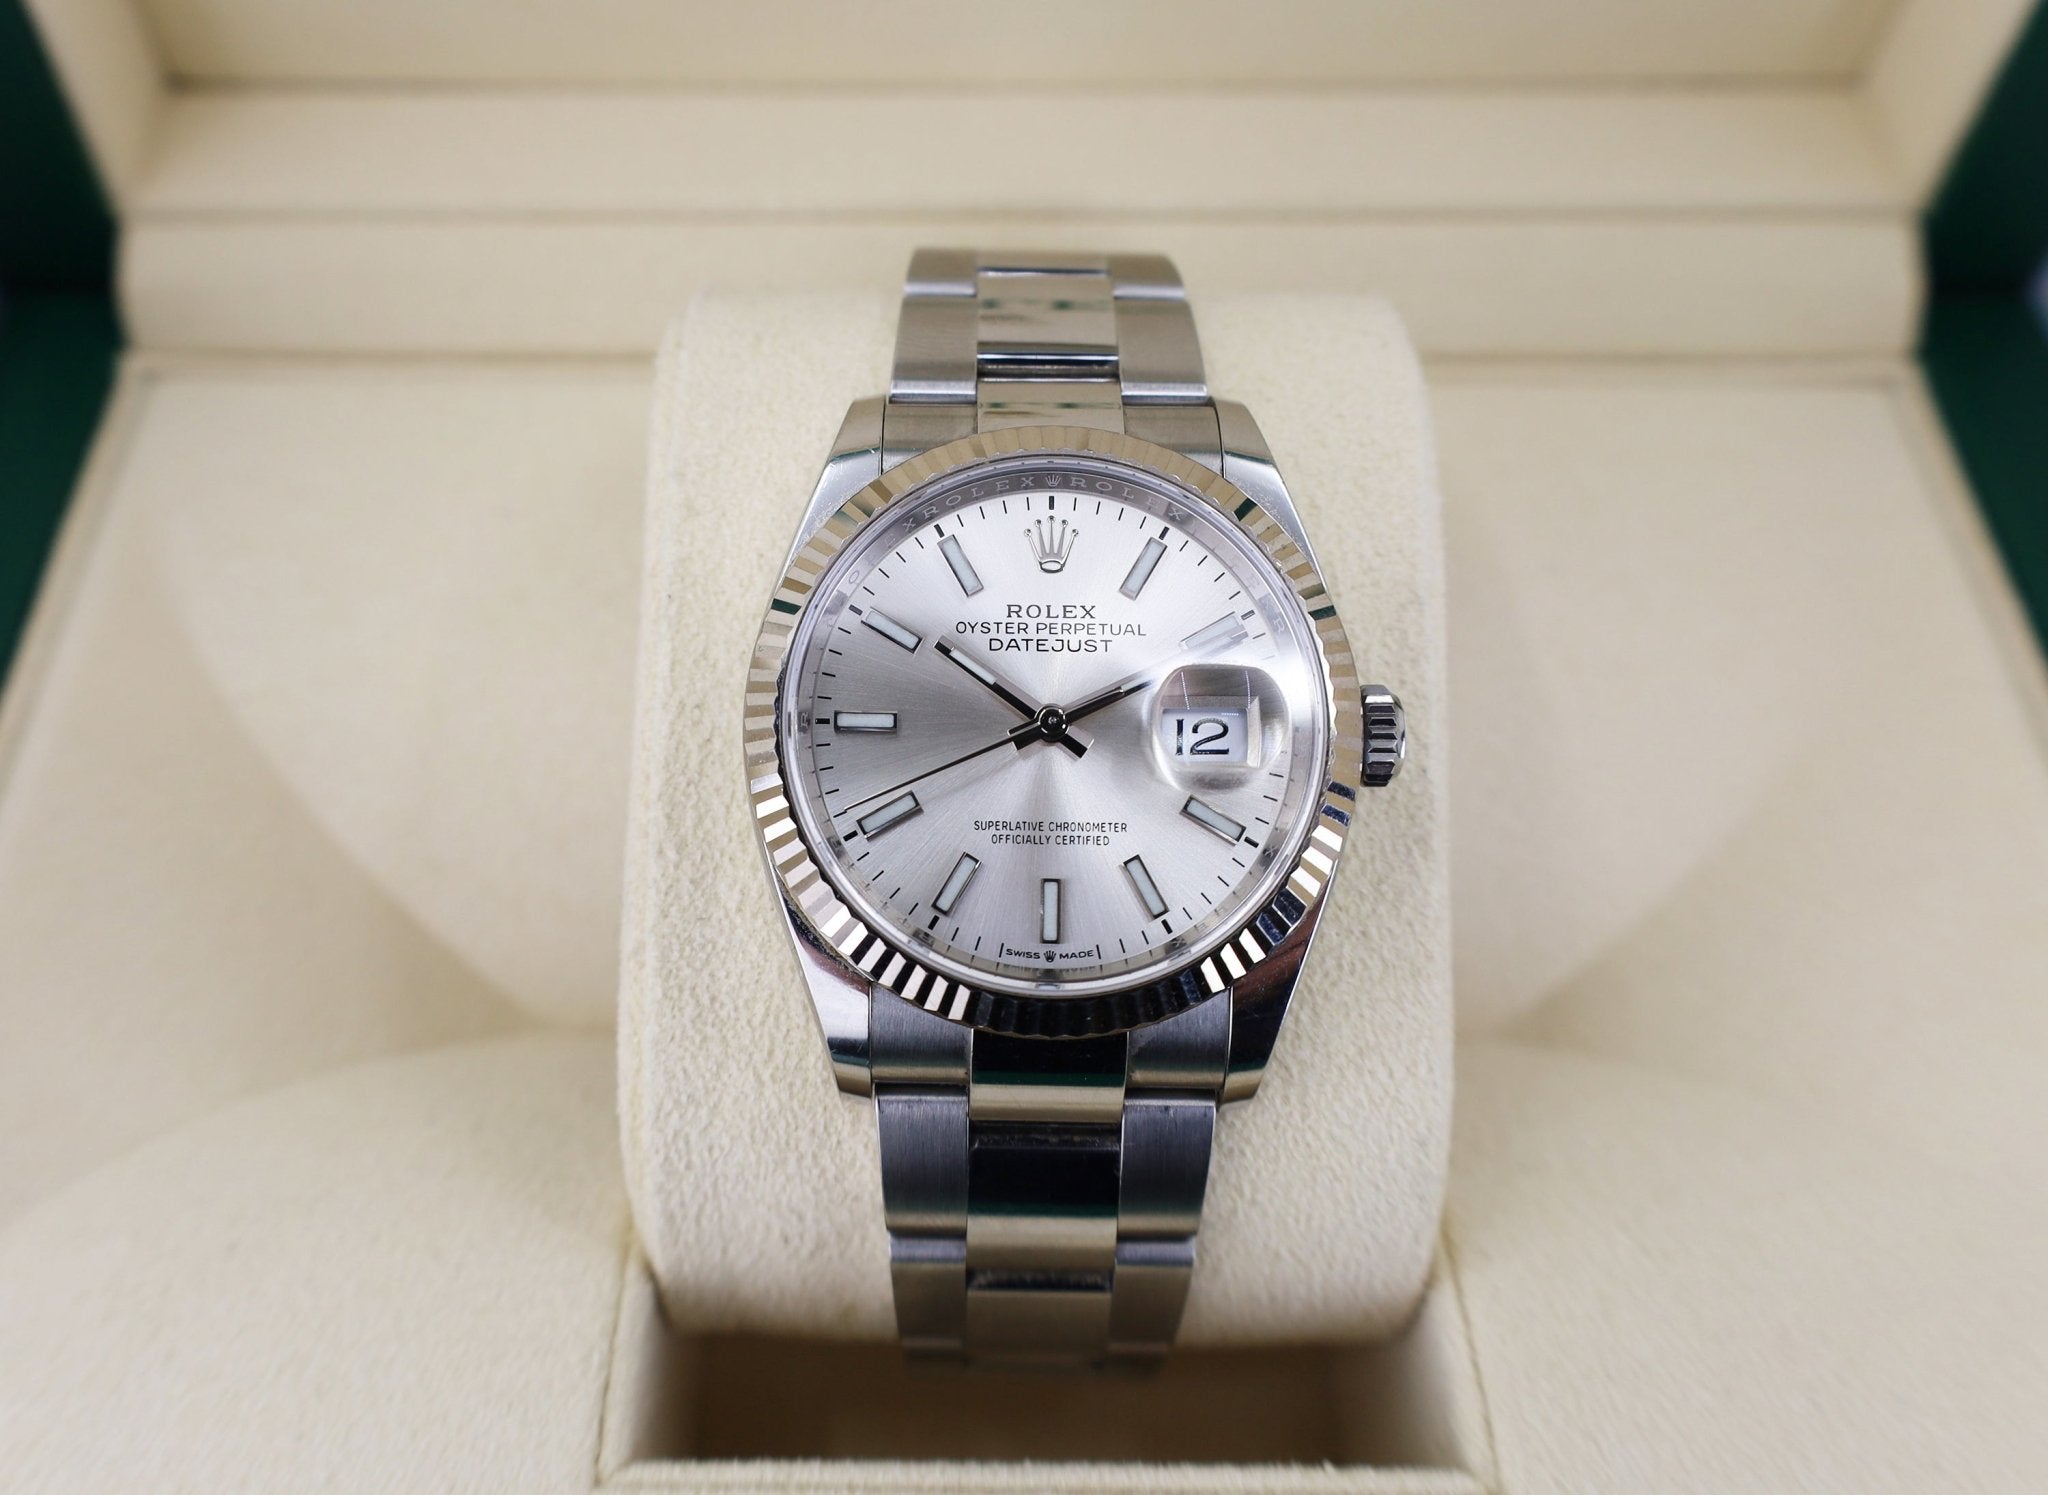 Rolex Datejust 126234 – Time NYC